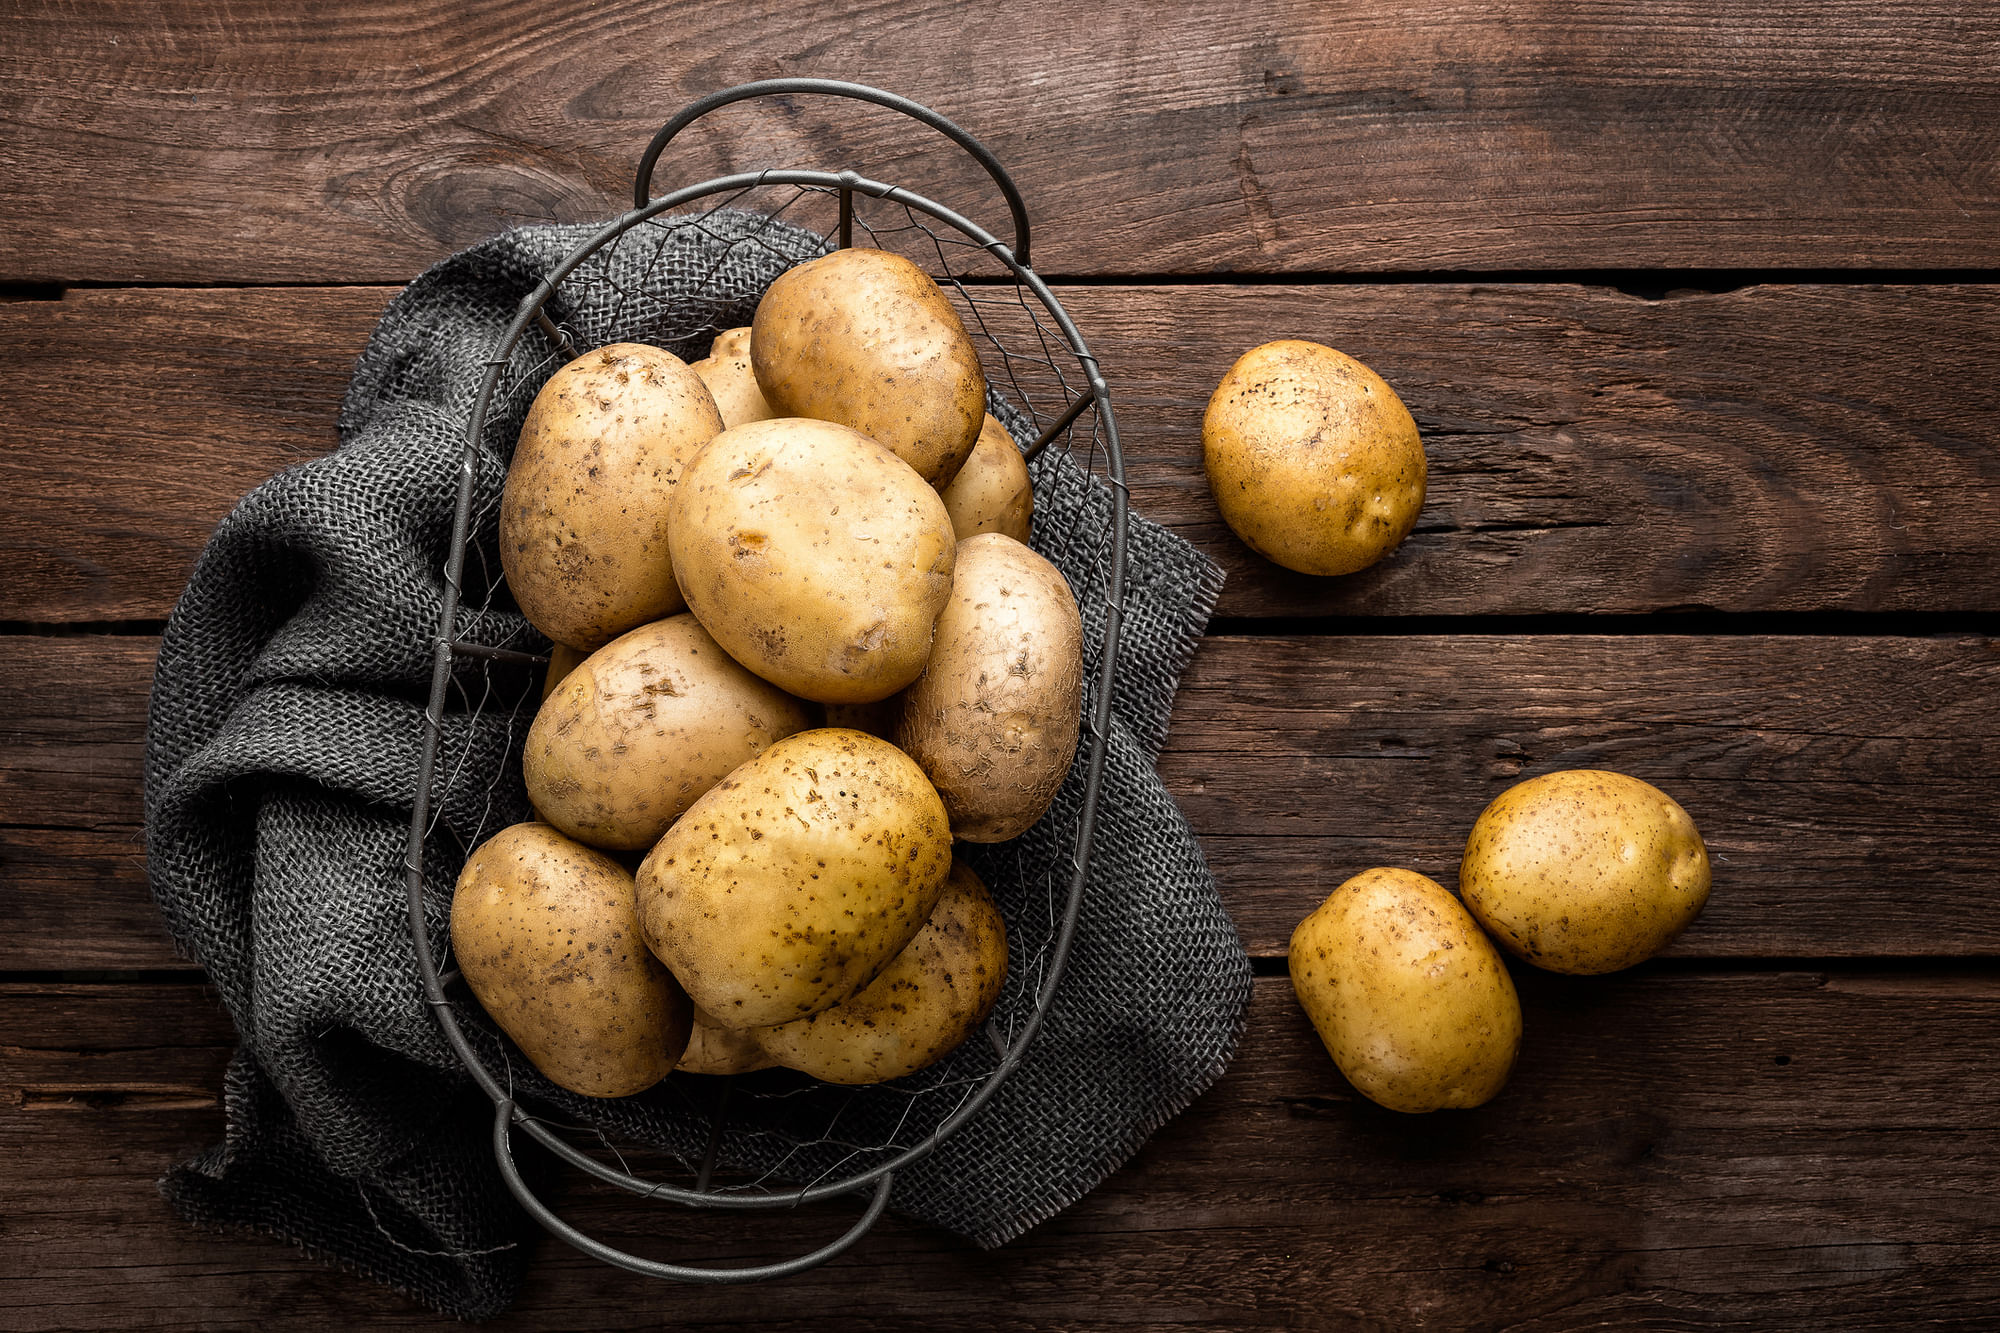 Potatoes are a rich source of nutrients like Vitamin C, Vitamin B6, Calcium, etc.